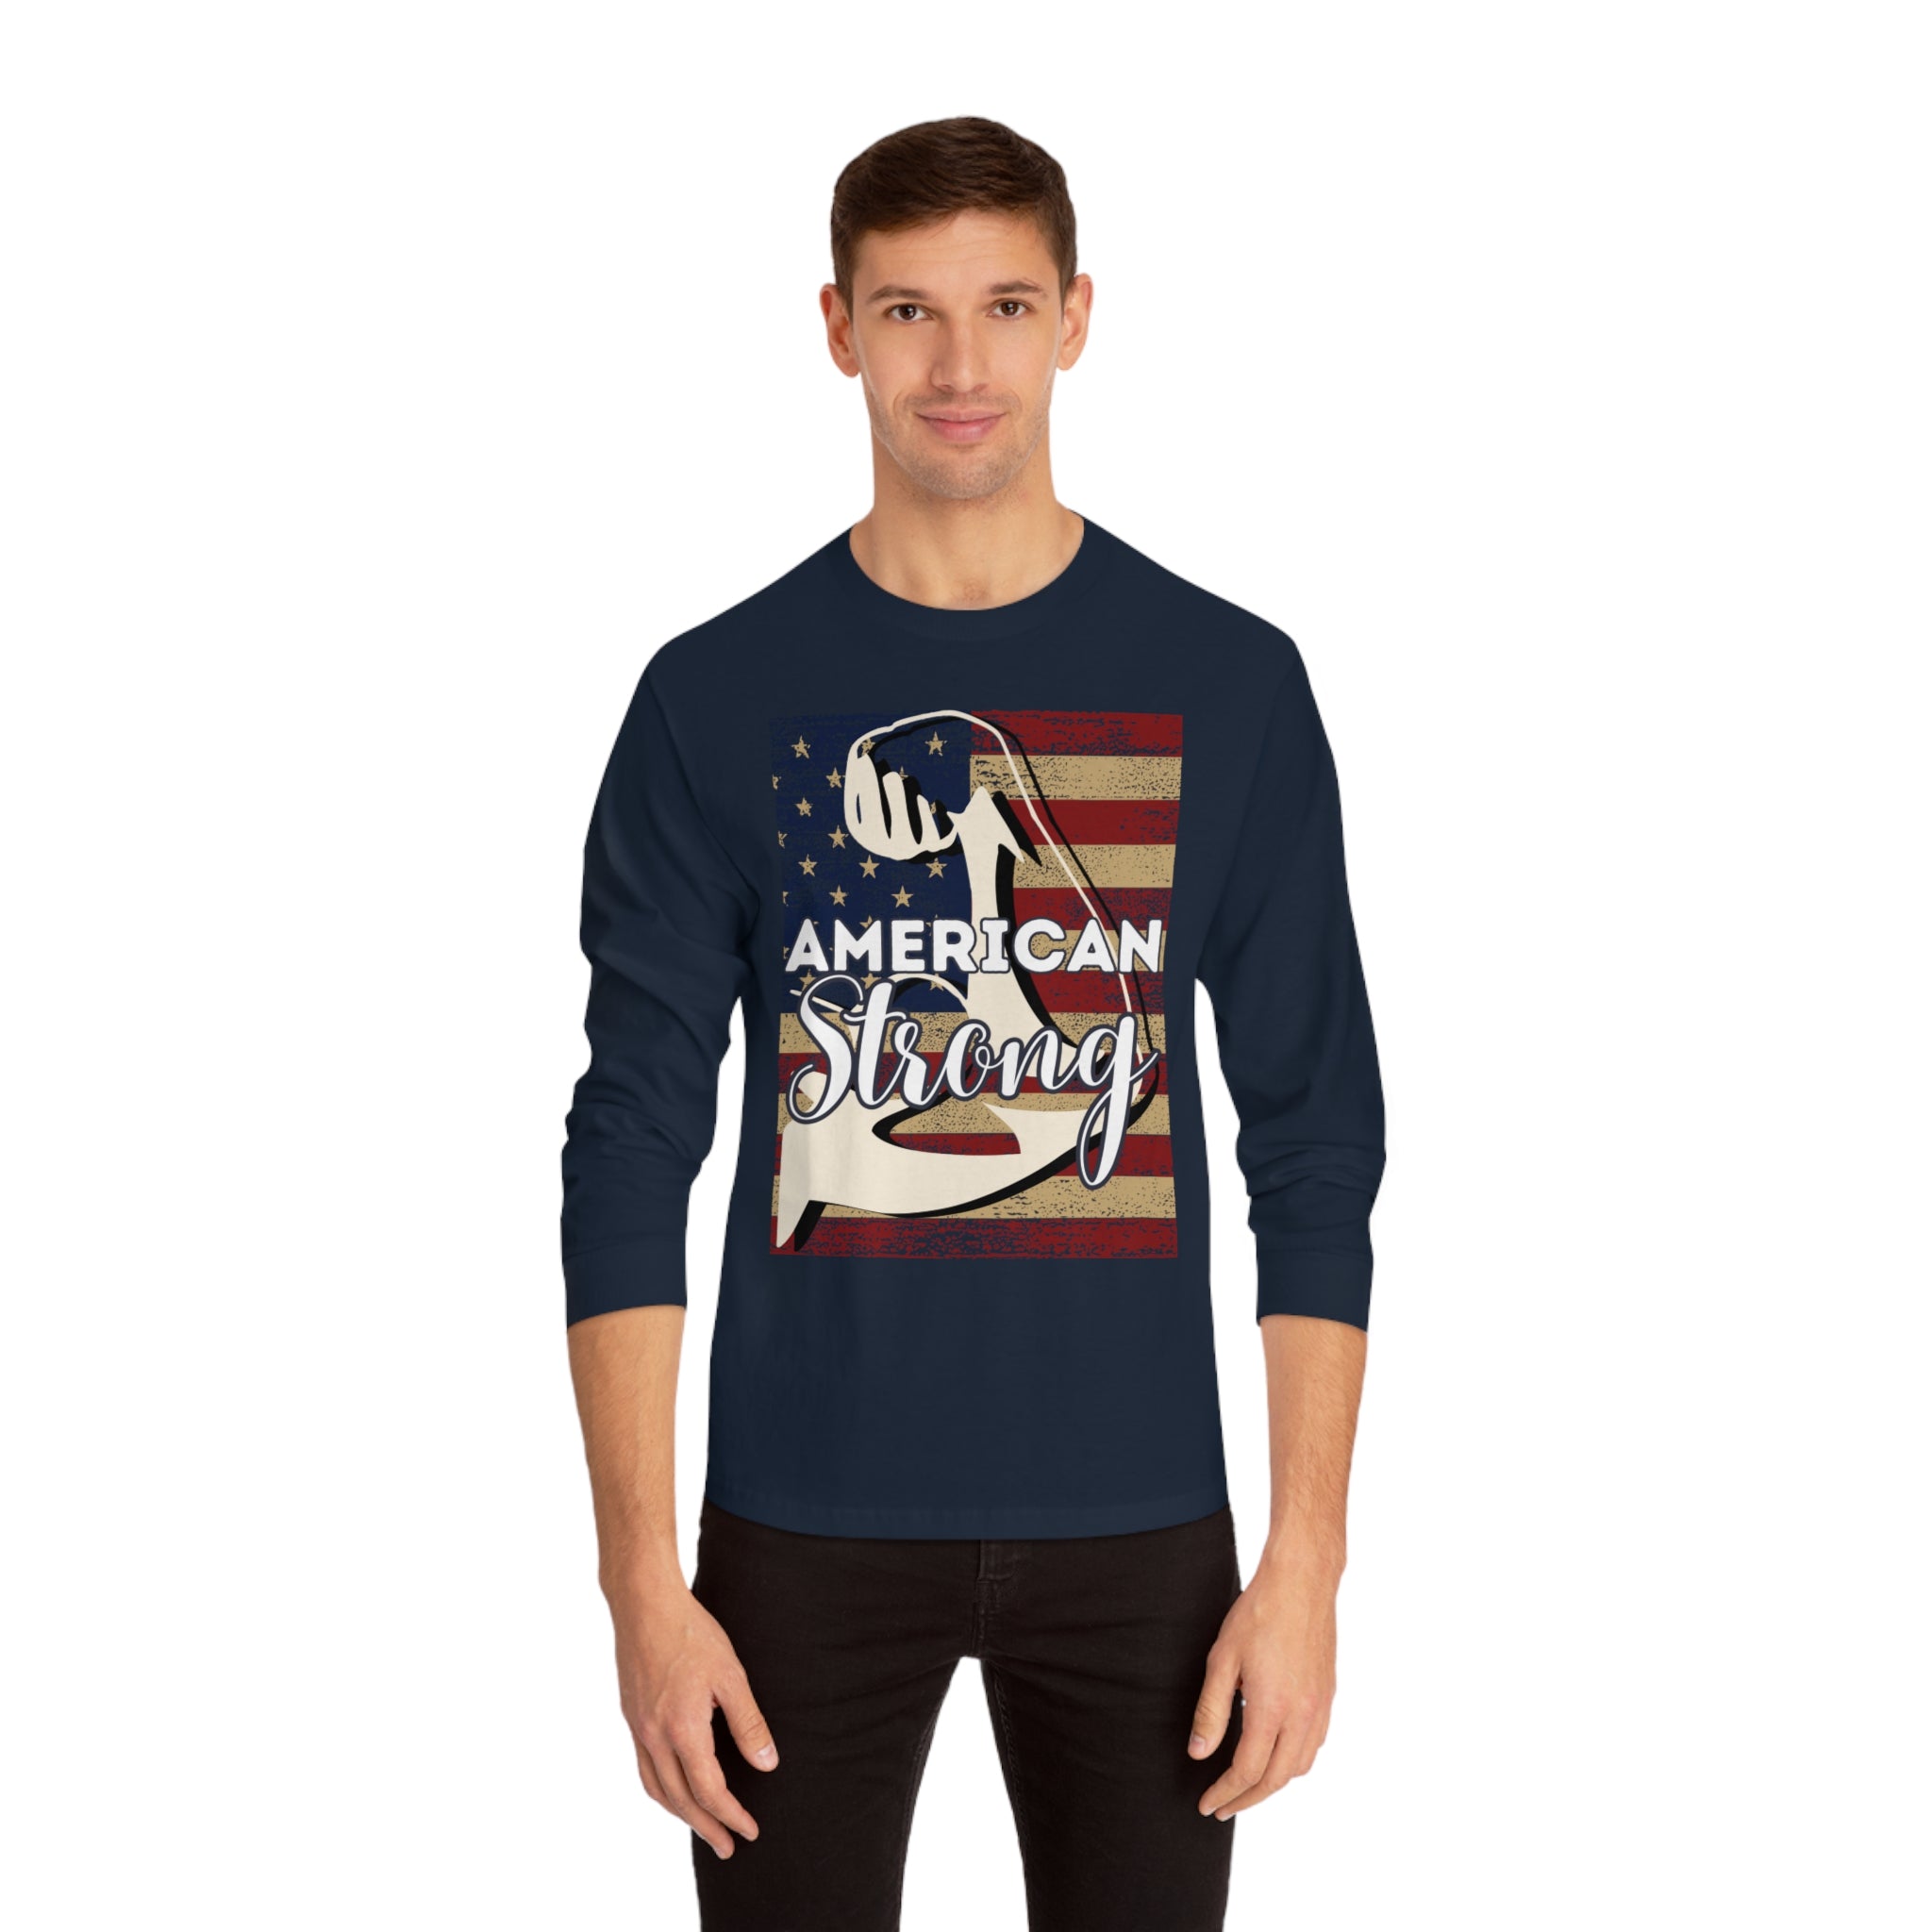 American Strong - Unisex Jersey Long Sleeve Tee